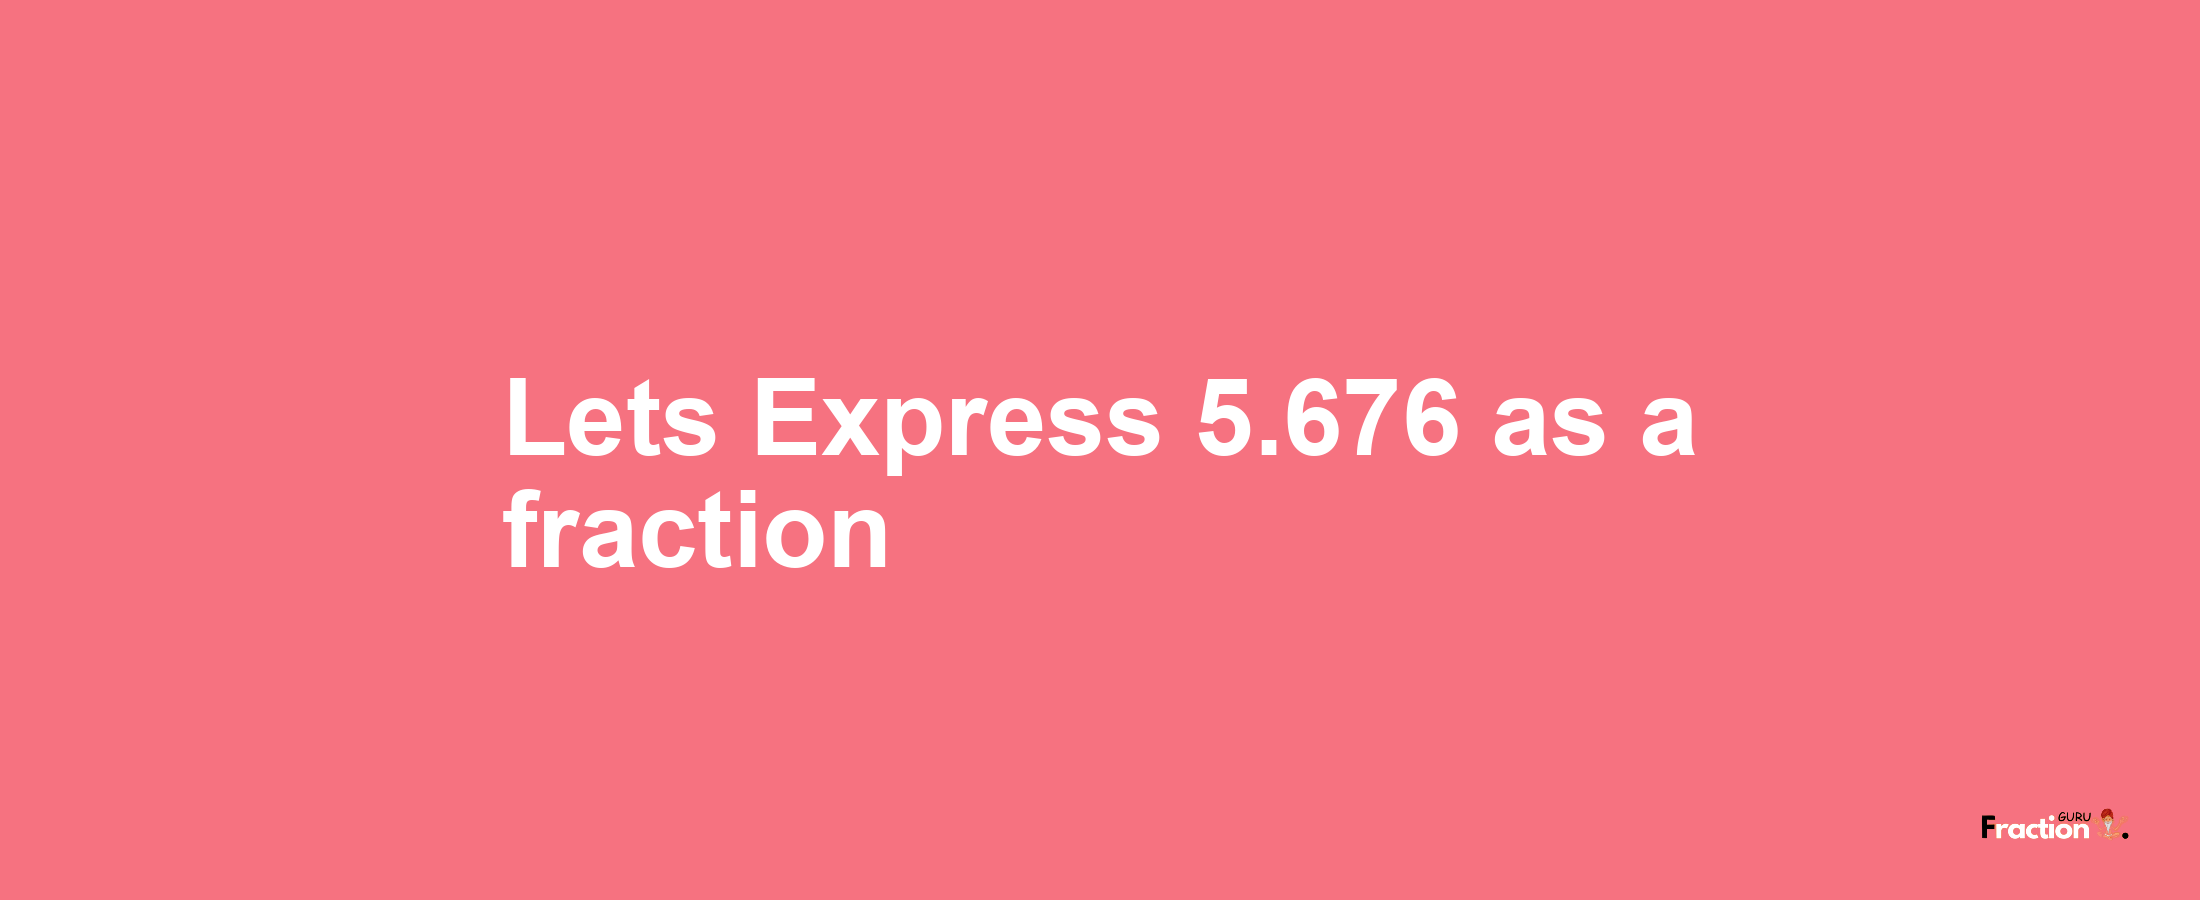 Lets Express 5.676 as afraction